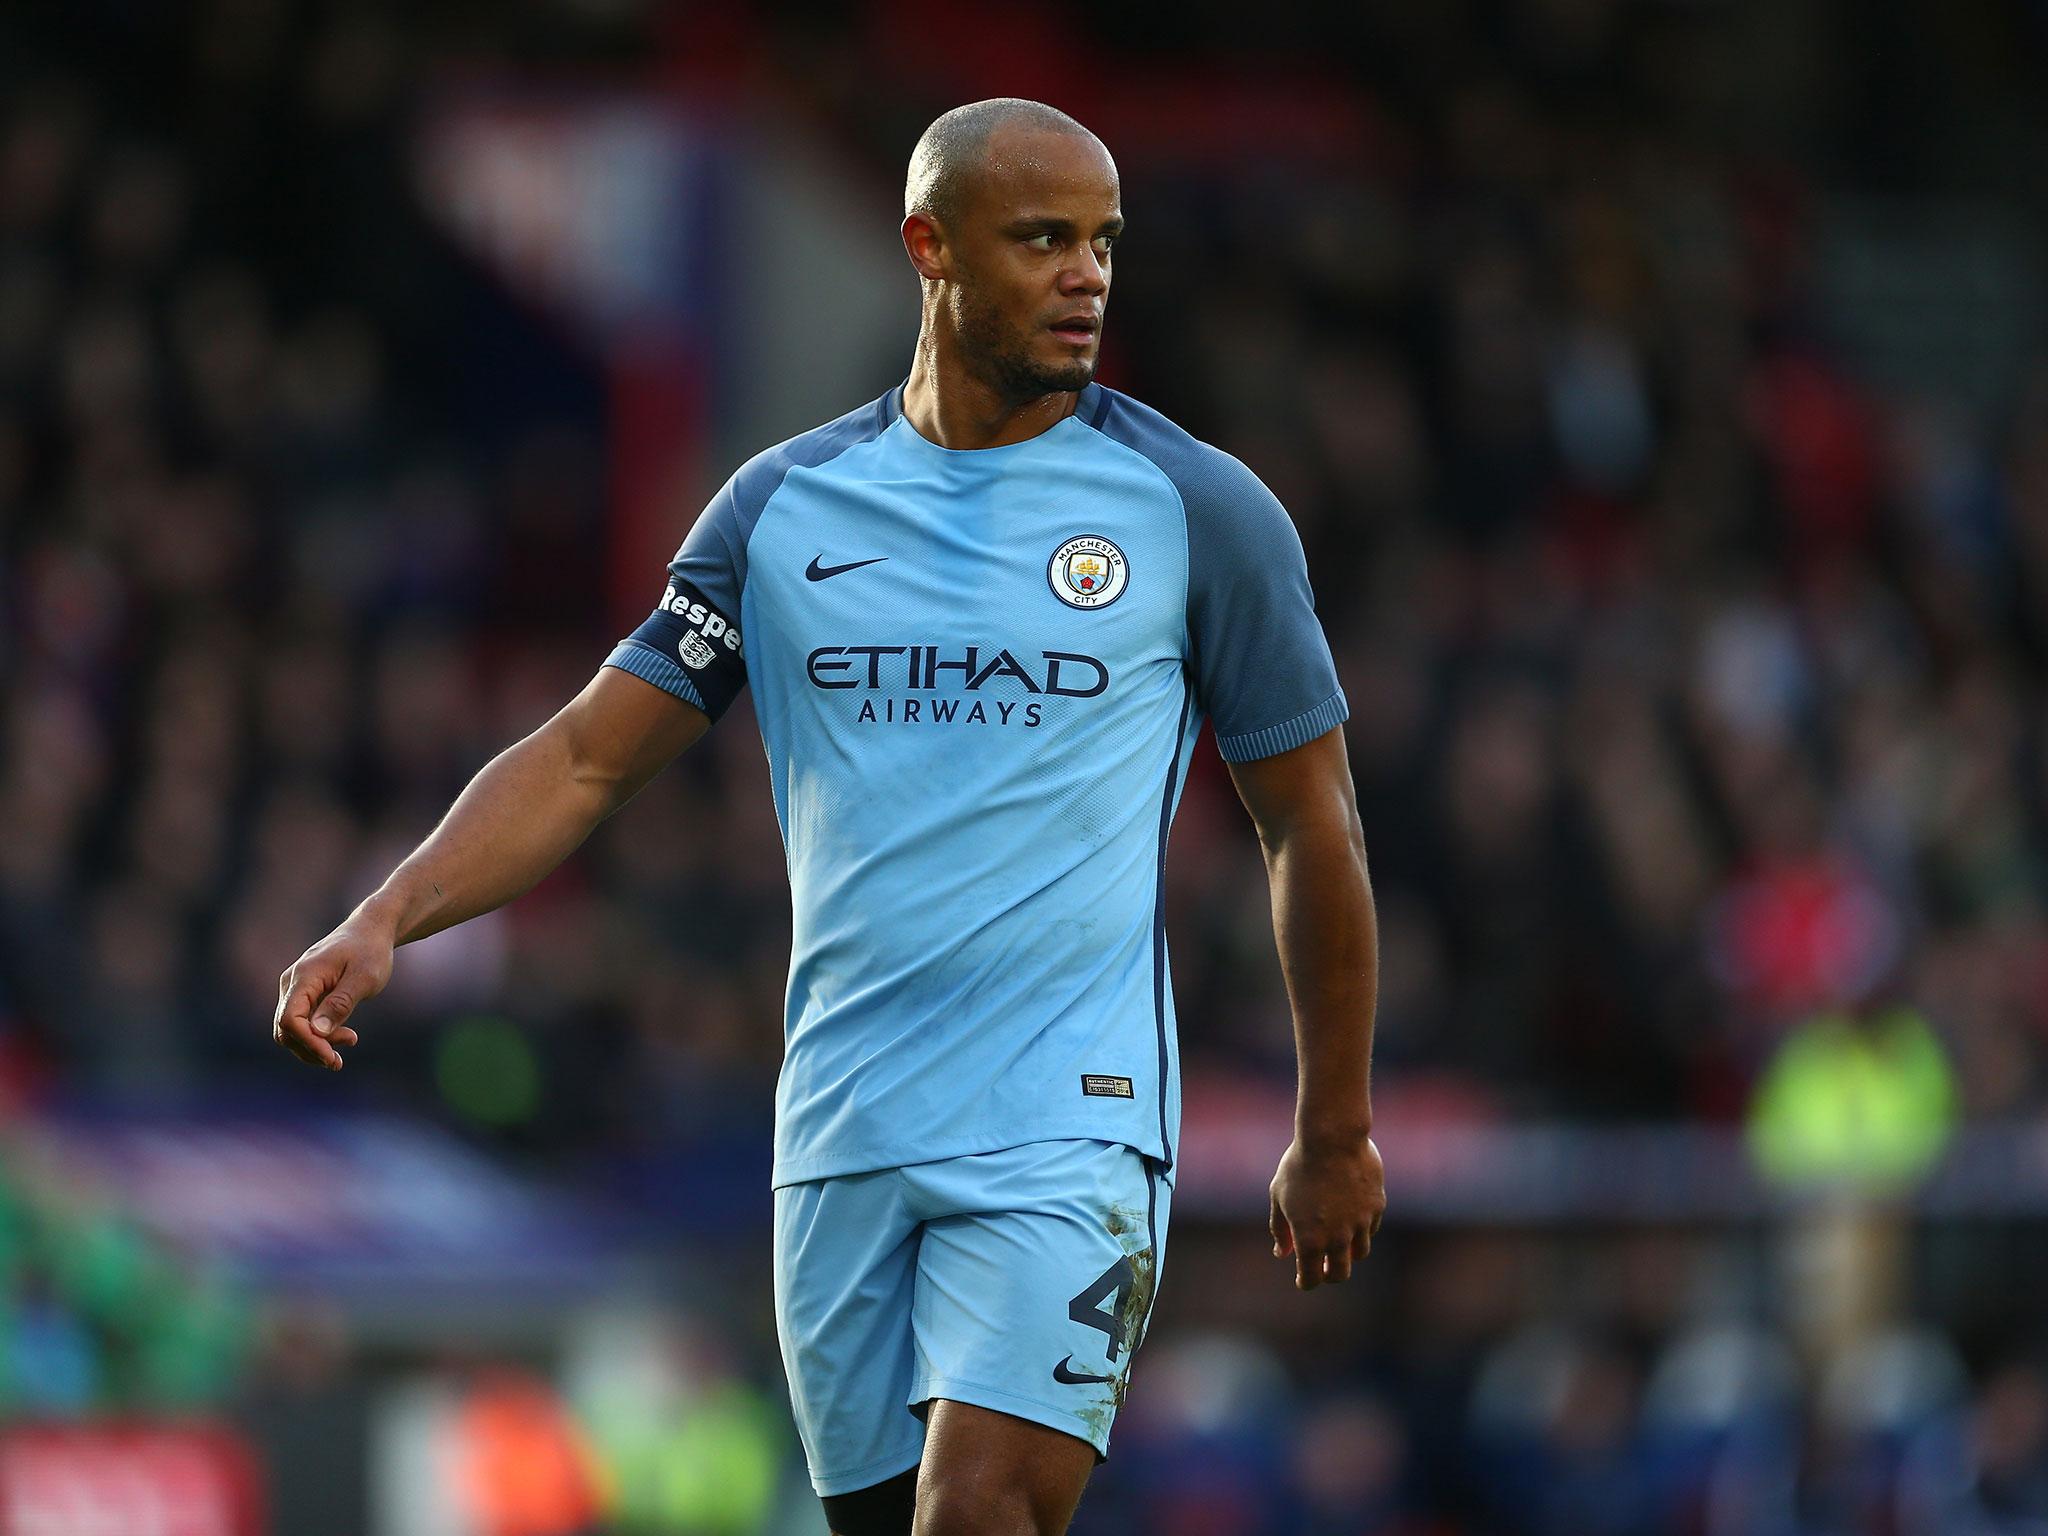 Vincent Kompany is not available for Manchester City's Champions League visit of Monaco